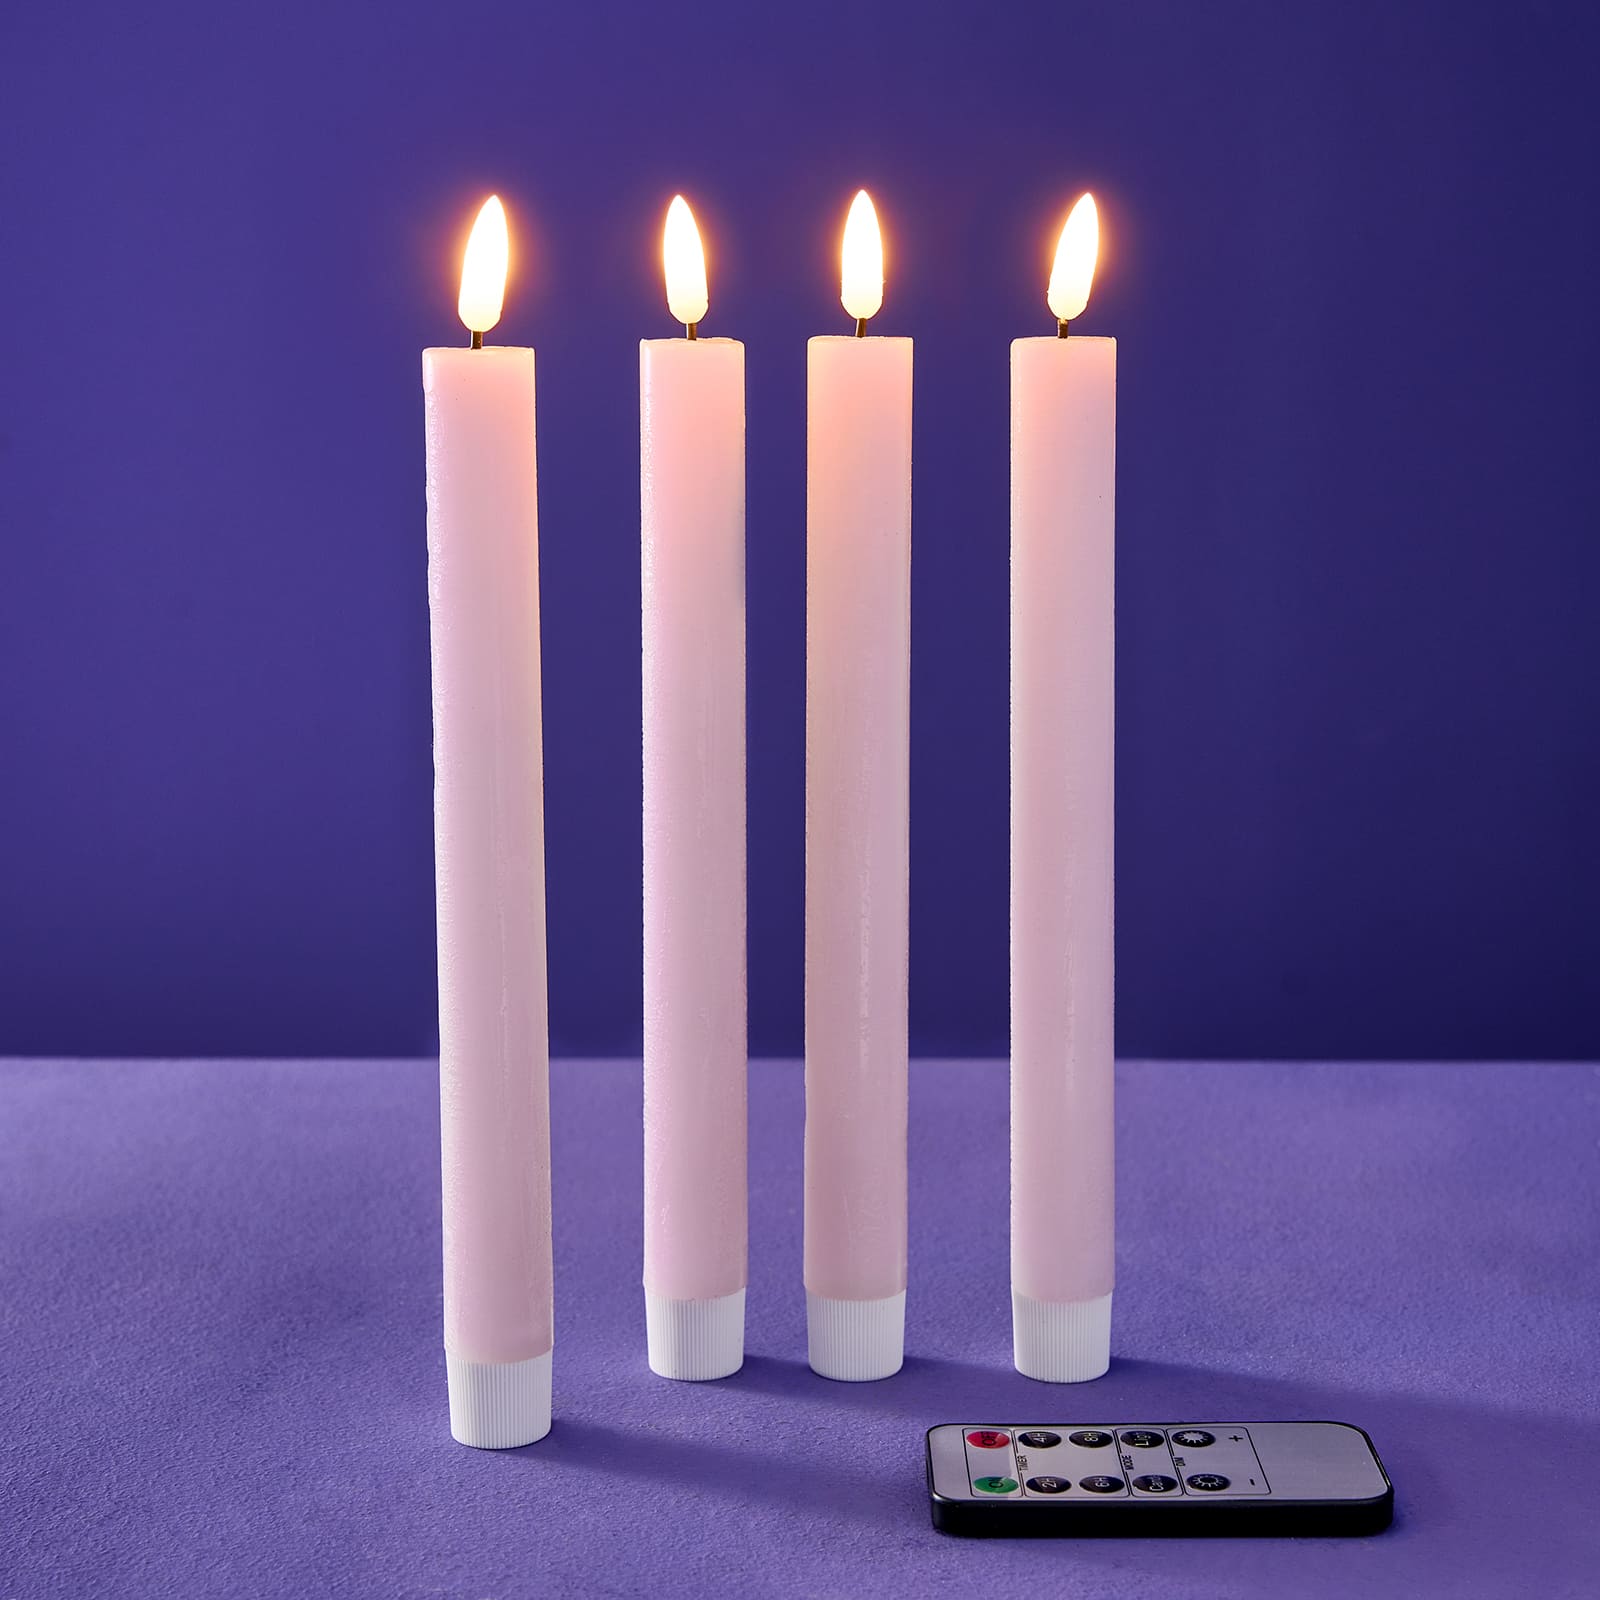 Set of 4 LED candles, pink, real wax/plastic/LED, H. 24.5 cm